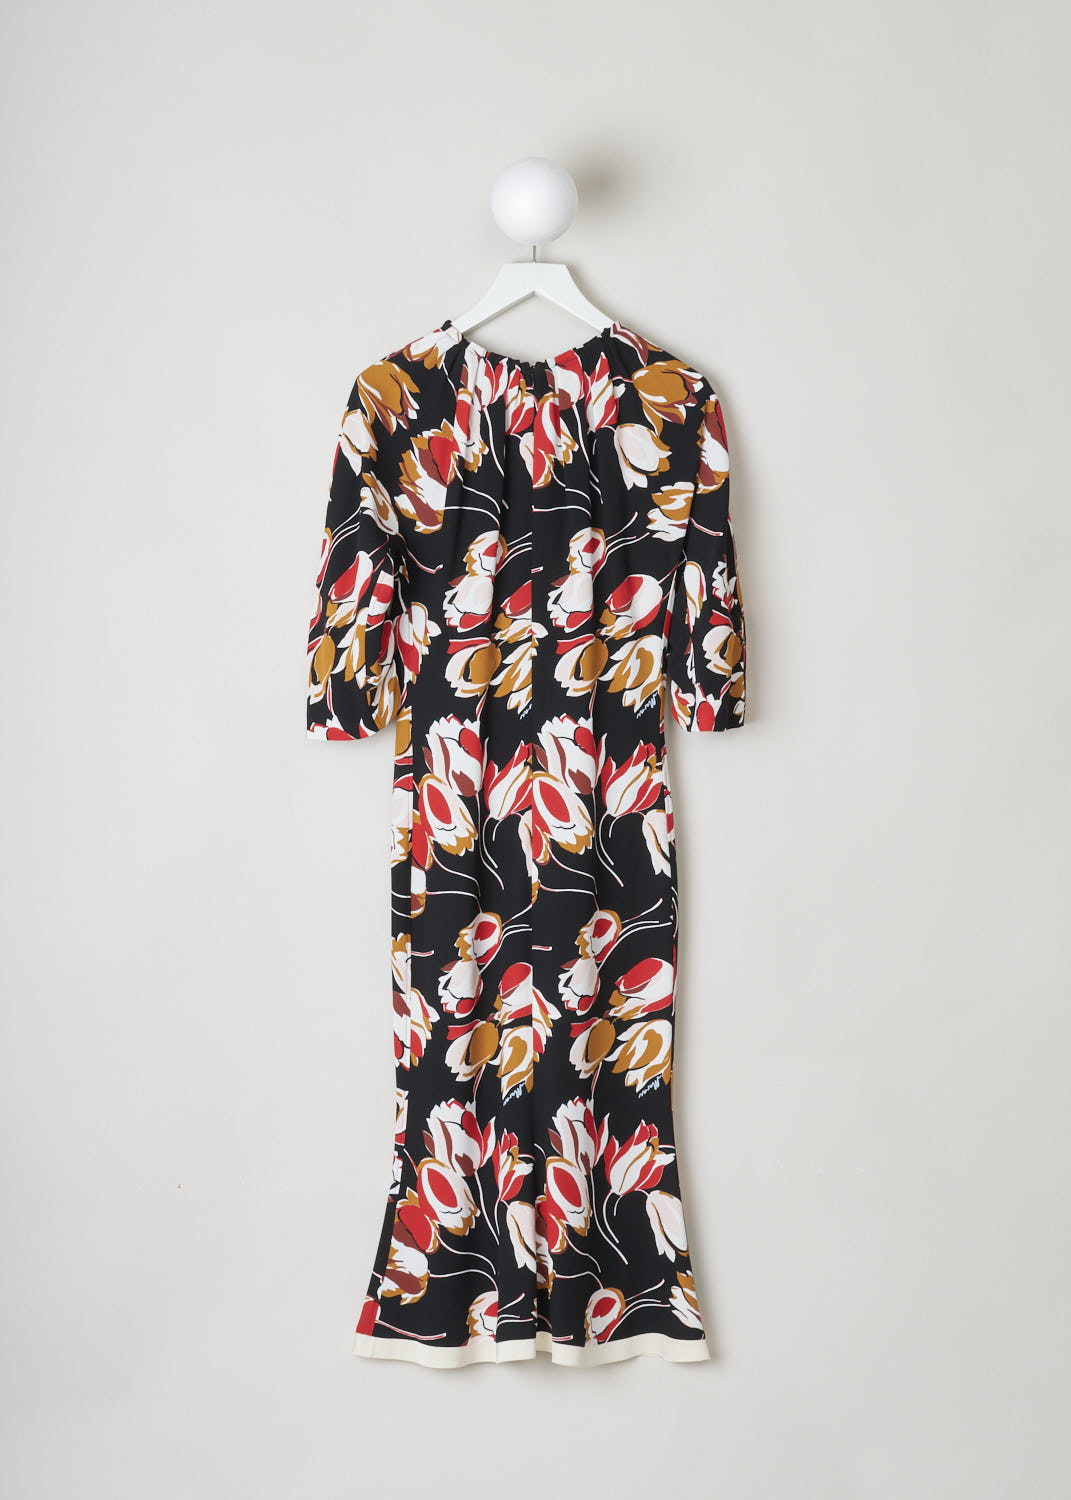 MARNI, BLACK MAXI DRESS WITH RED FLORAL PRINT, ABMA0739Q0_UTV844_WIN99, Black, Print, Back, This black maxi dress has a floral print in shades of reds and browns. The dress has a round, box pleated neckline. Those same pleats can be found on the three-quarter sleeves. In the back, a concealed centre zip functions as the closing option. The dress has a white satin hemline. 
